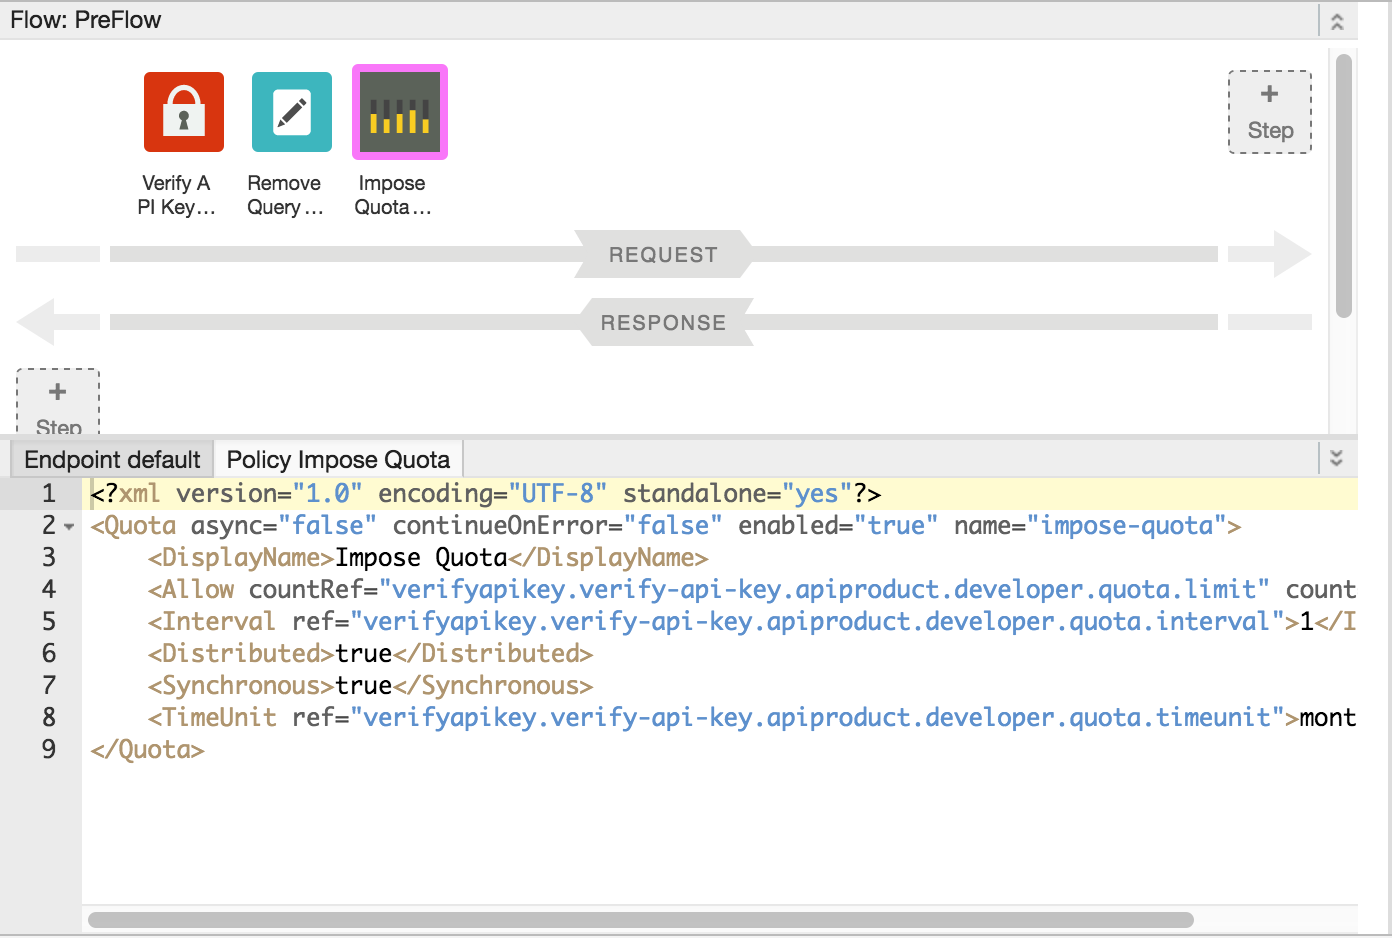 Policies in the PreFlow in the Designer and Code view